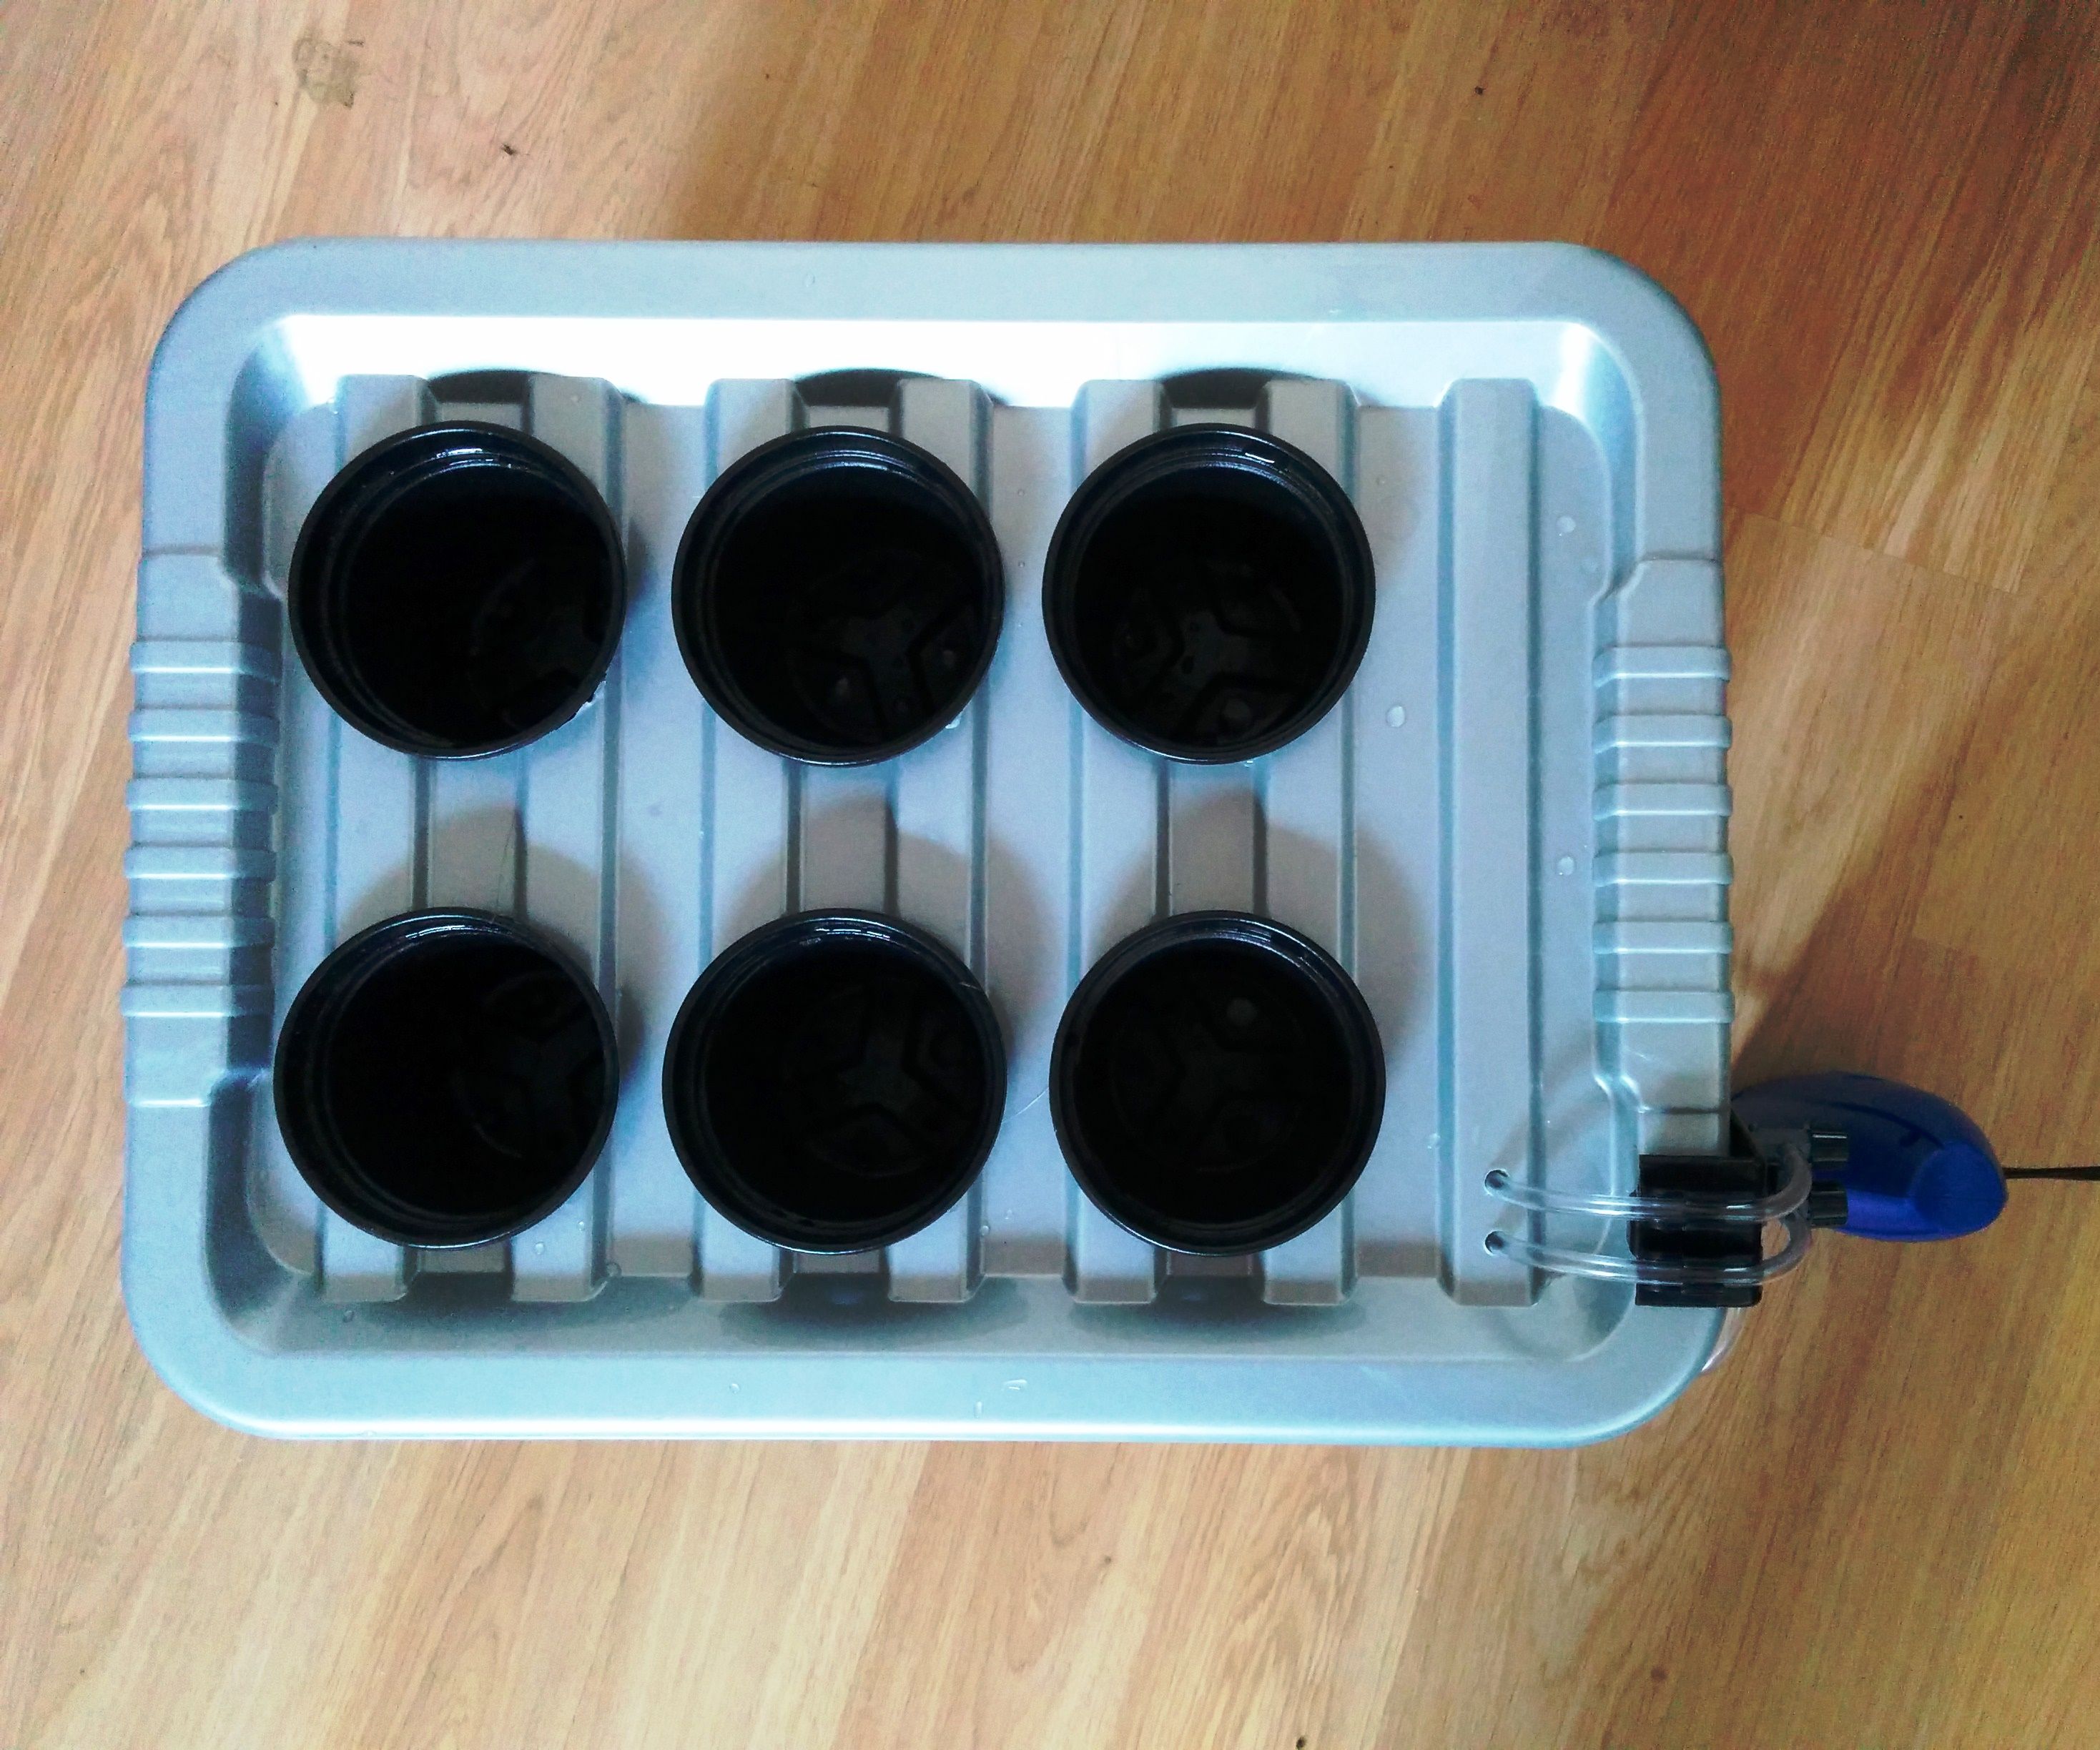 Deep Water Culture Hydroponics System - No Power Tools Required!